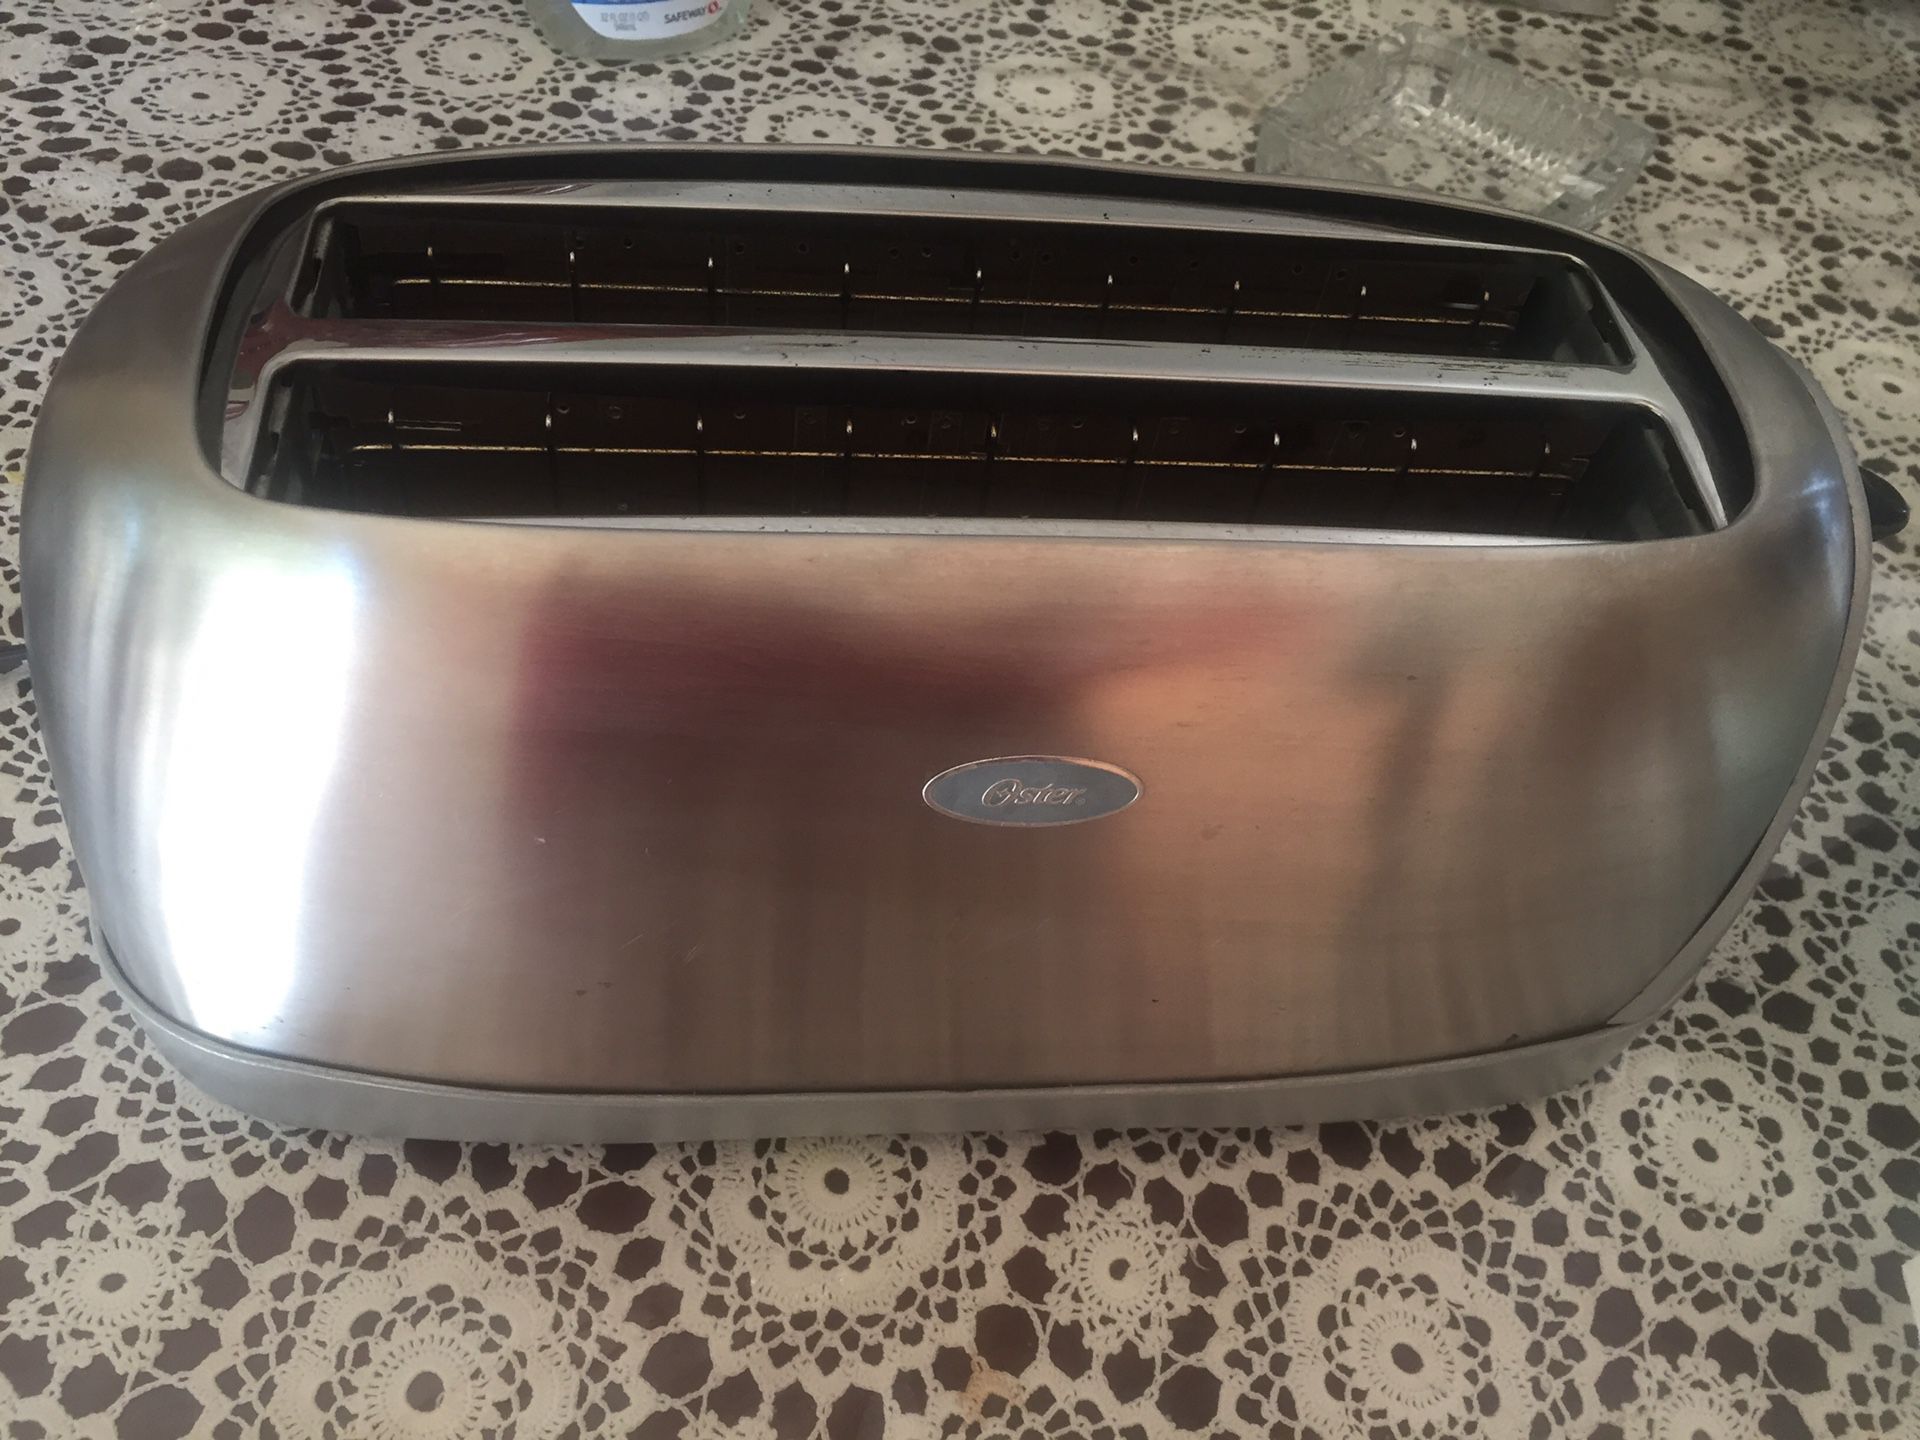 Oster Stainless Steel Silver 4 slot Toaster 7.3 in. H x 6.9 in. W x 16 in. D